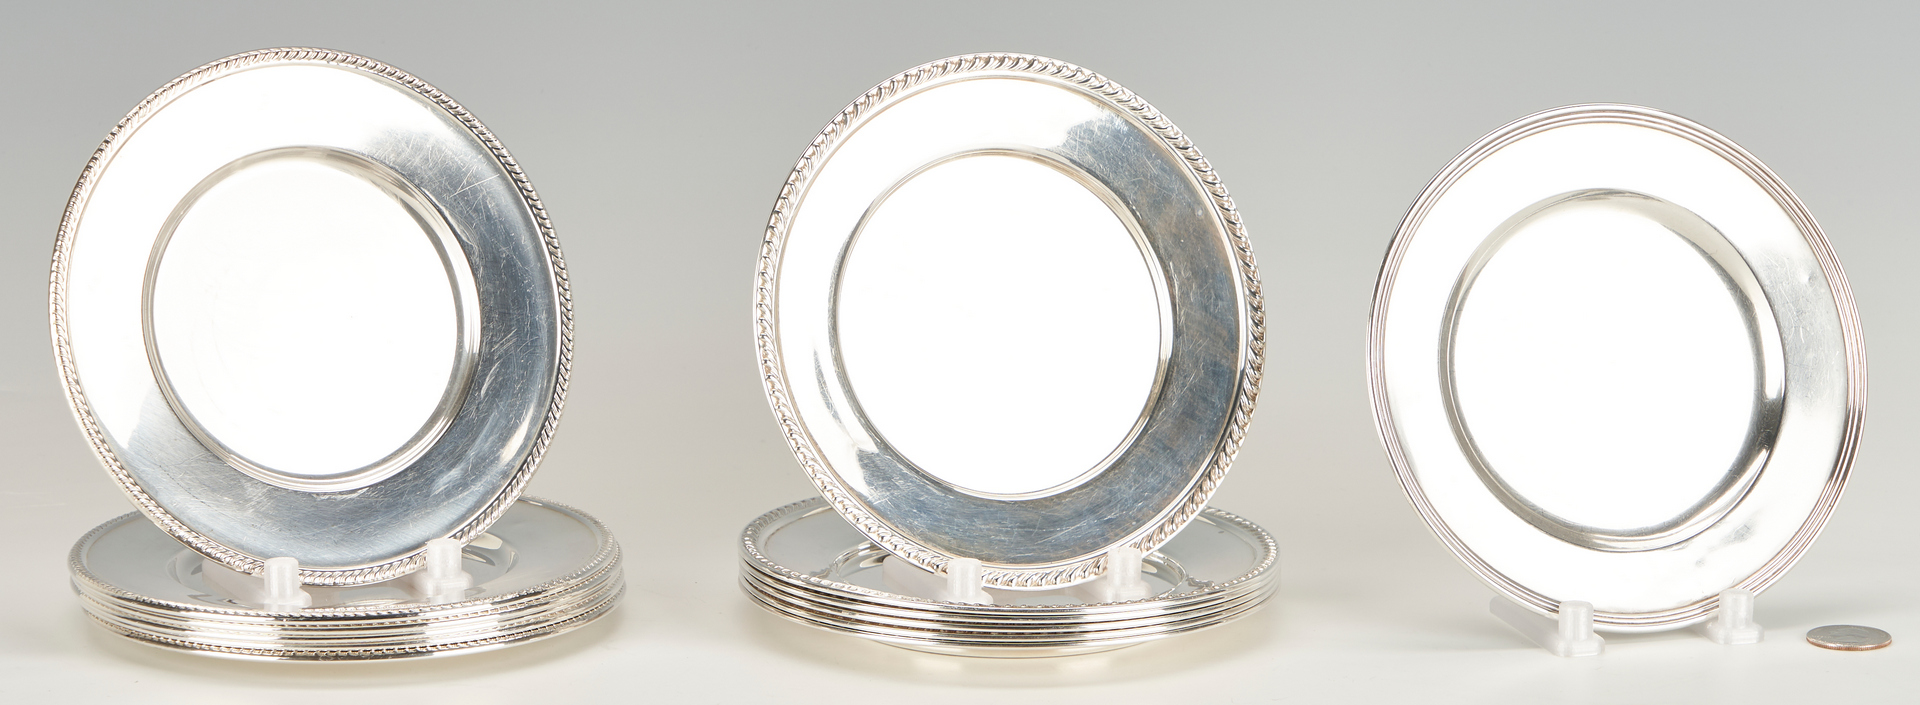 Lot 1227: 13 Sterling Silver Bread Plates, Fina and Amston